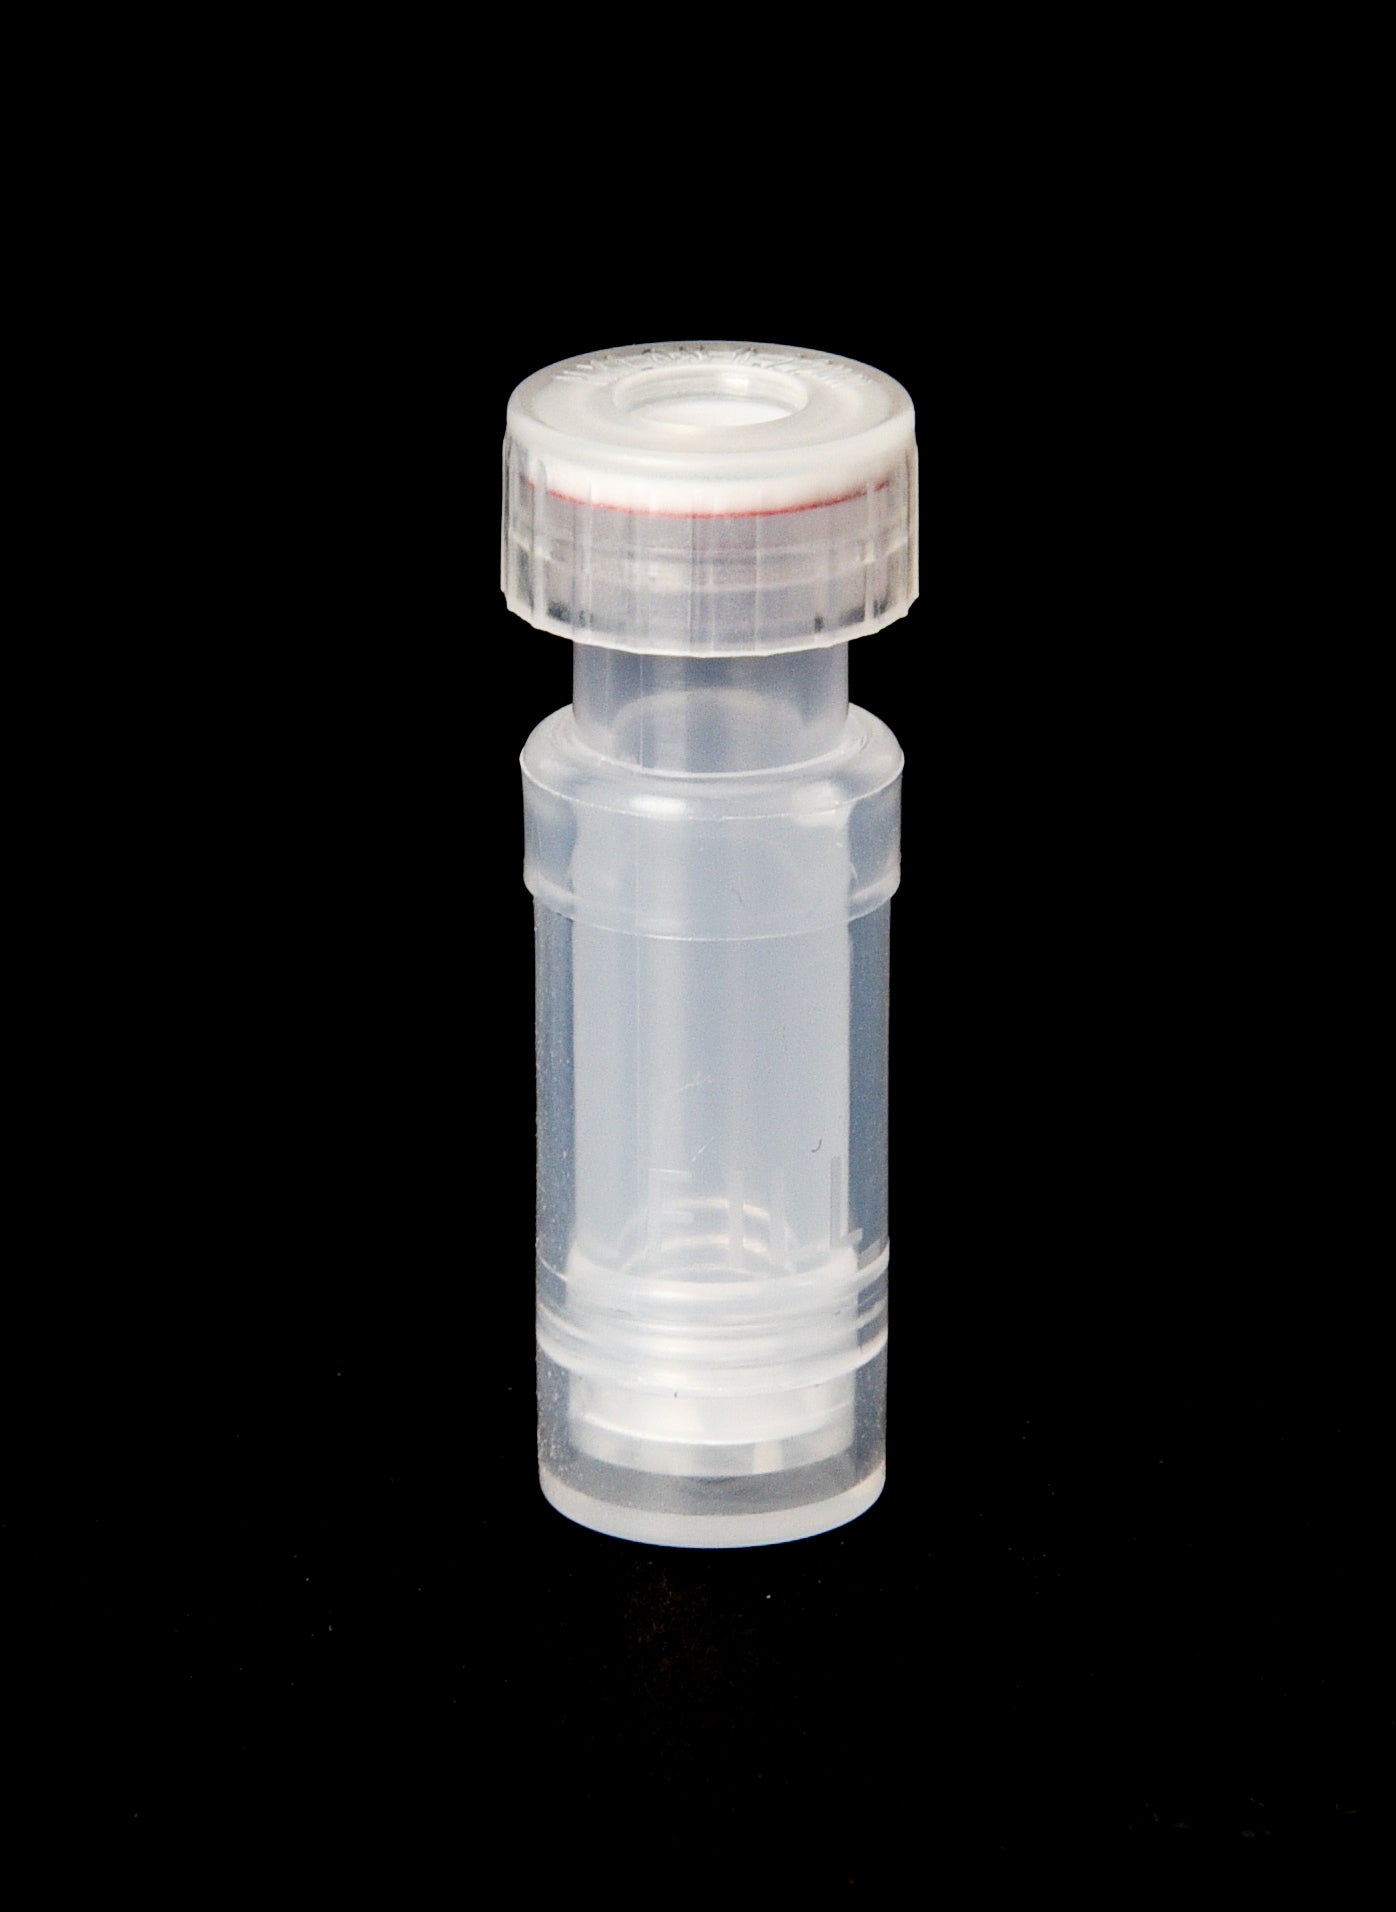 TEST TUBE AND VIAL HOLDER Products